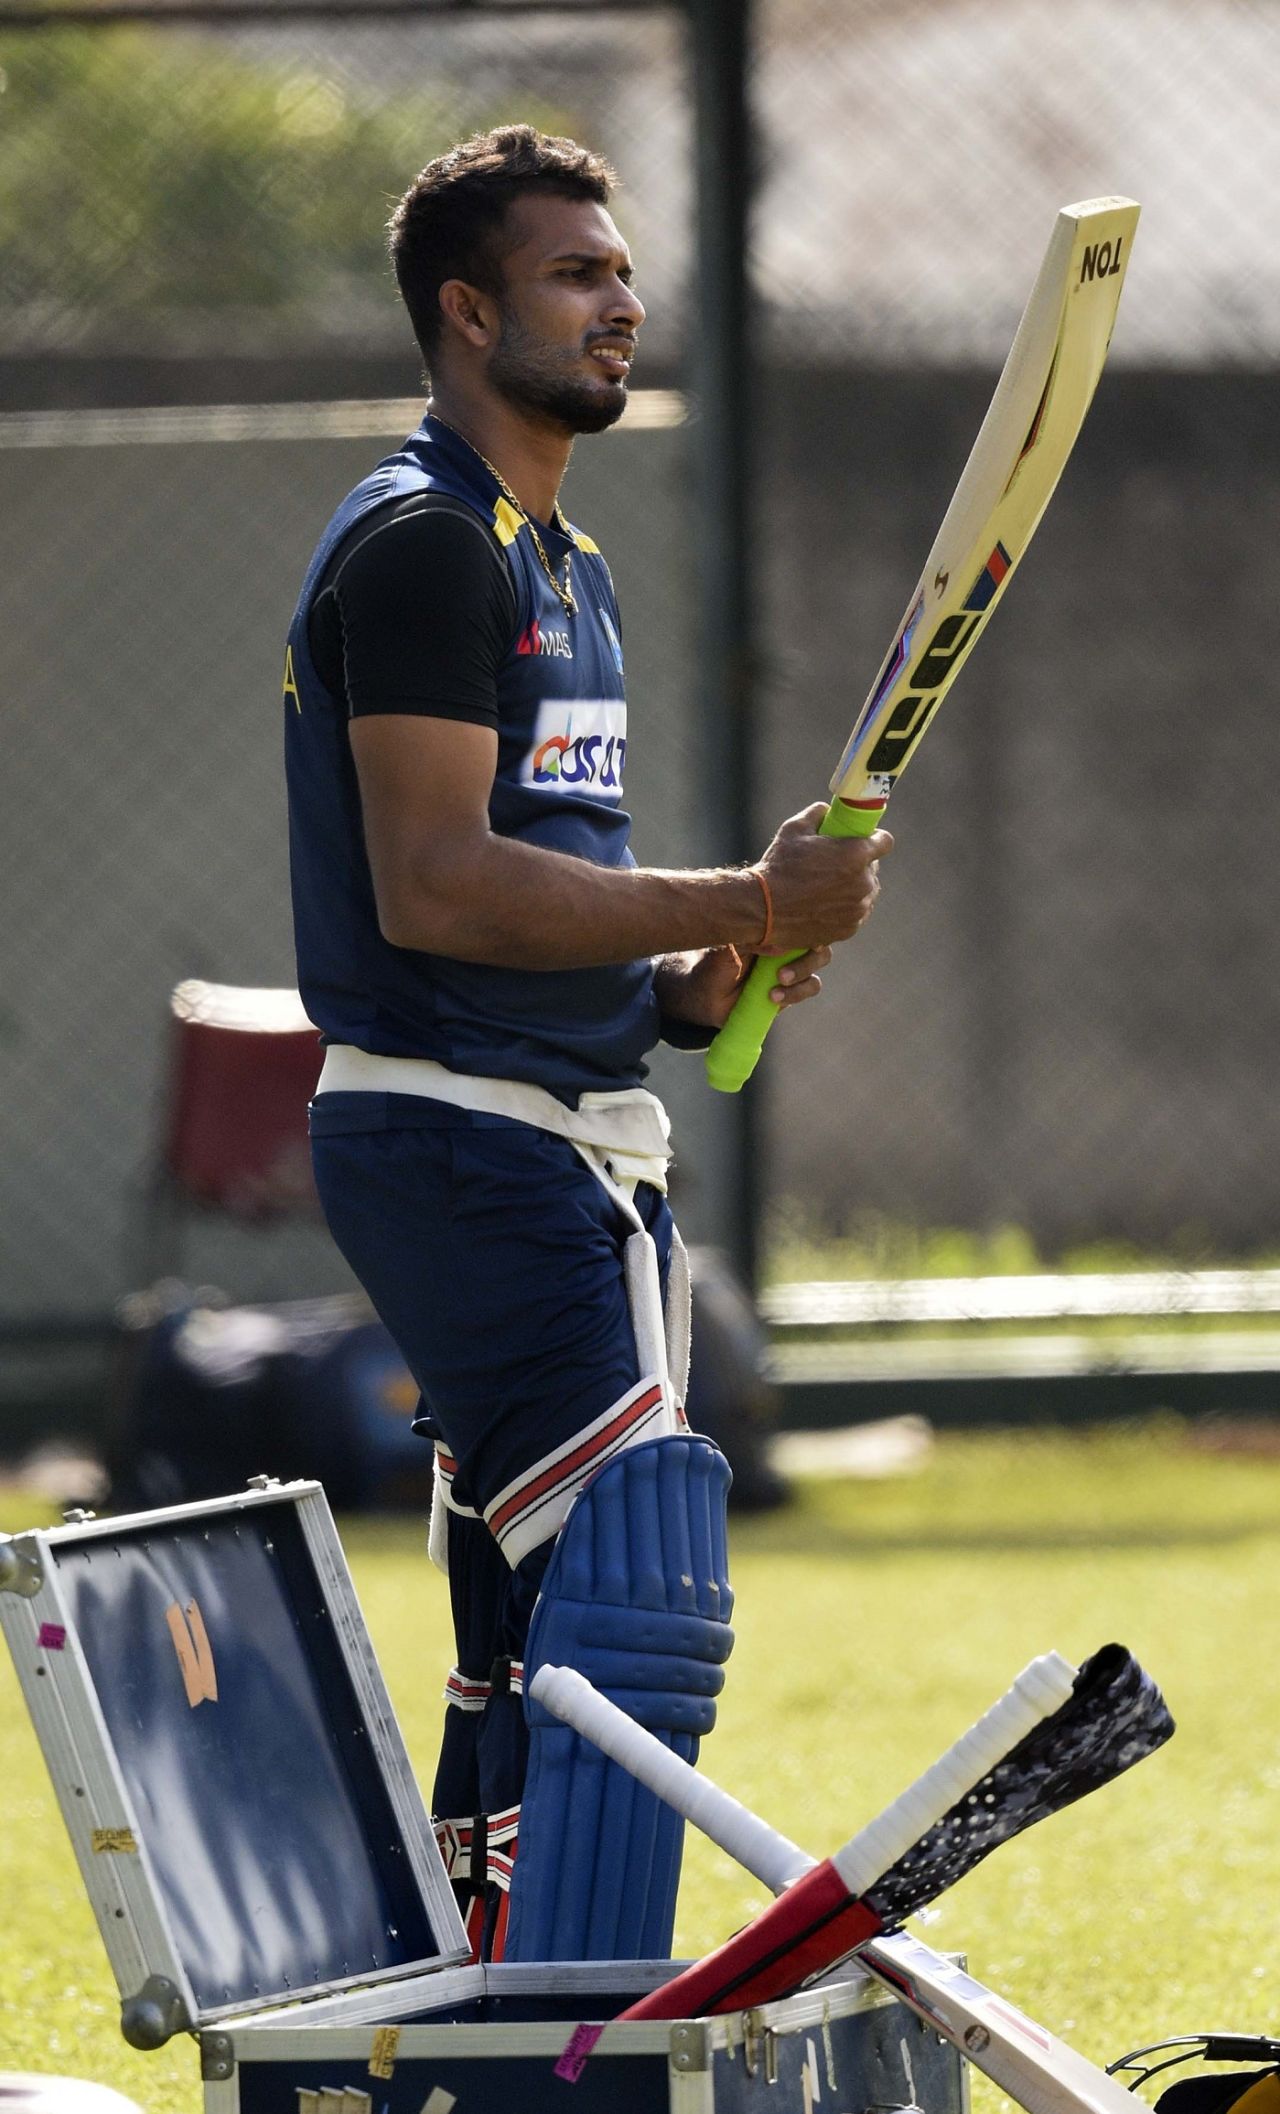 Dasun Shanaka in action at the nets, Colombo, July 13, 2021